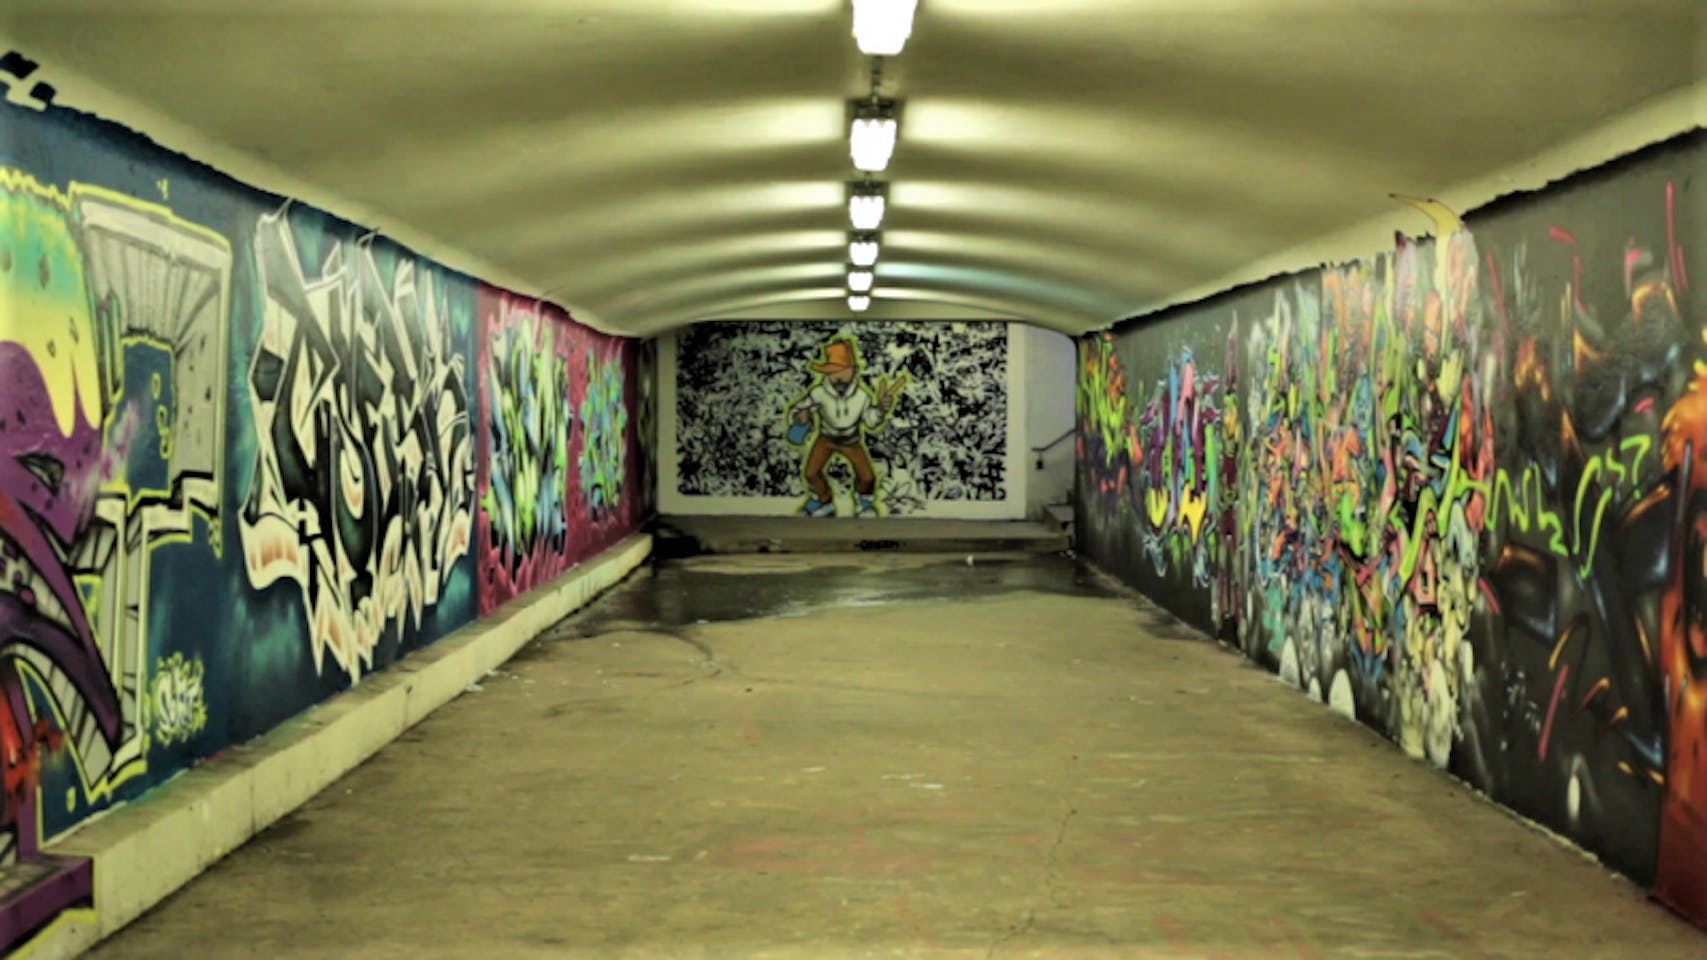 The Ultimate Guide To Graffiti And Street Art In Reykjavi